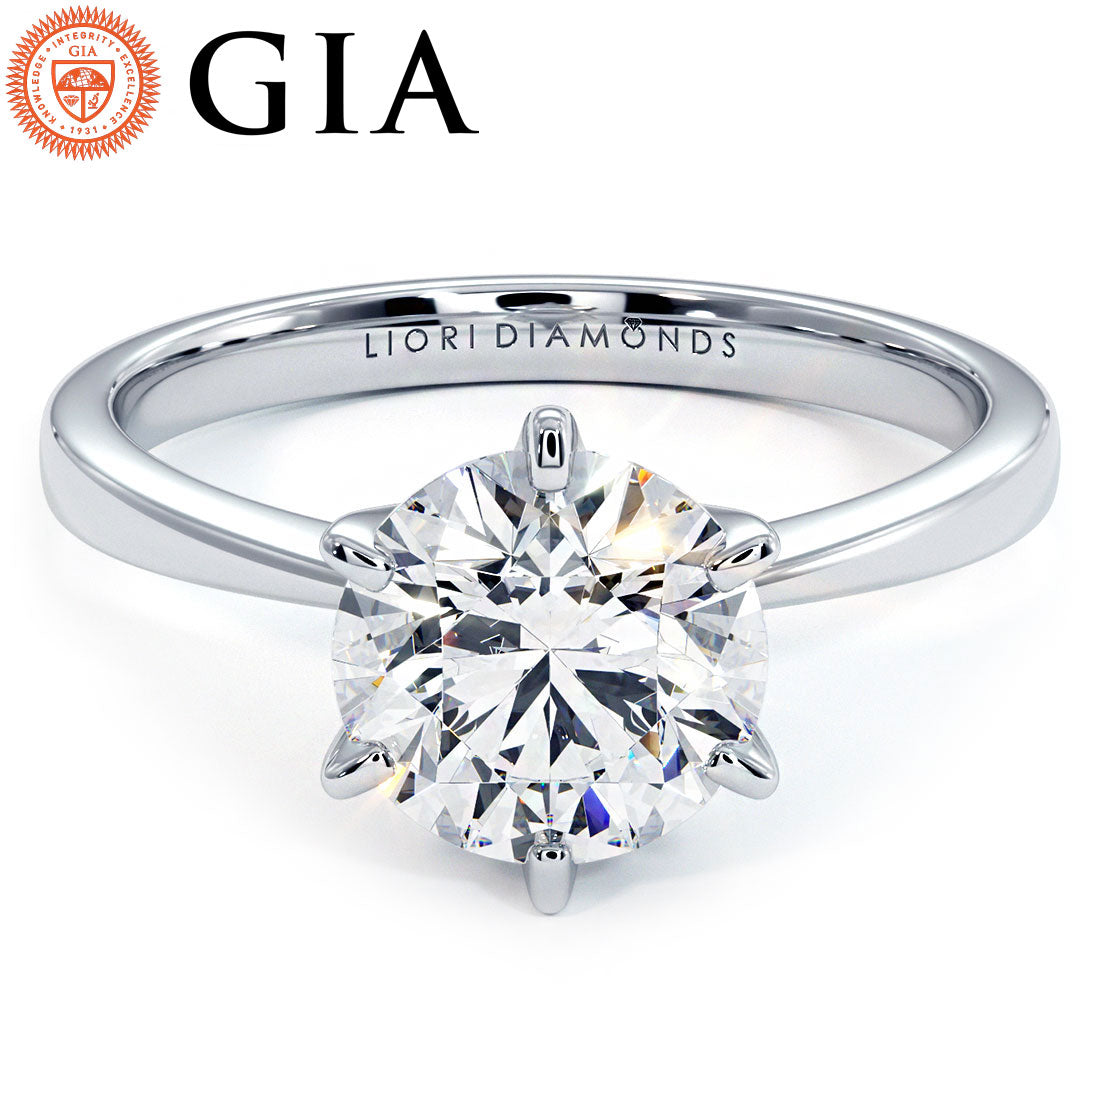 1.55ct GIA Certified F-VS1 Round Brilliant Petite Tapered 6 Prong Solitaire Lab Grown Diamond Engagement Ring set in Platinum